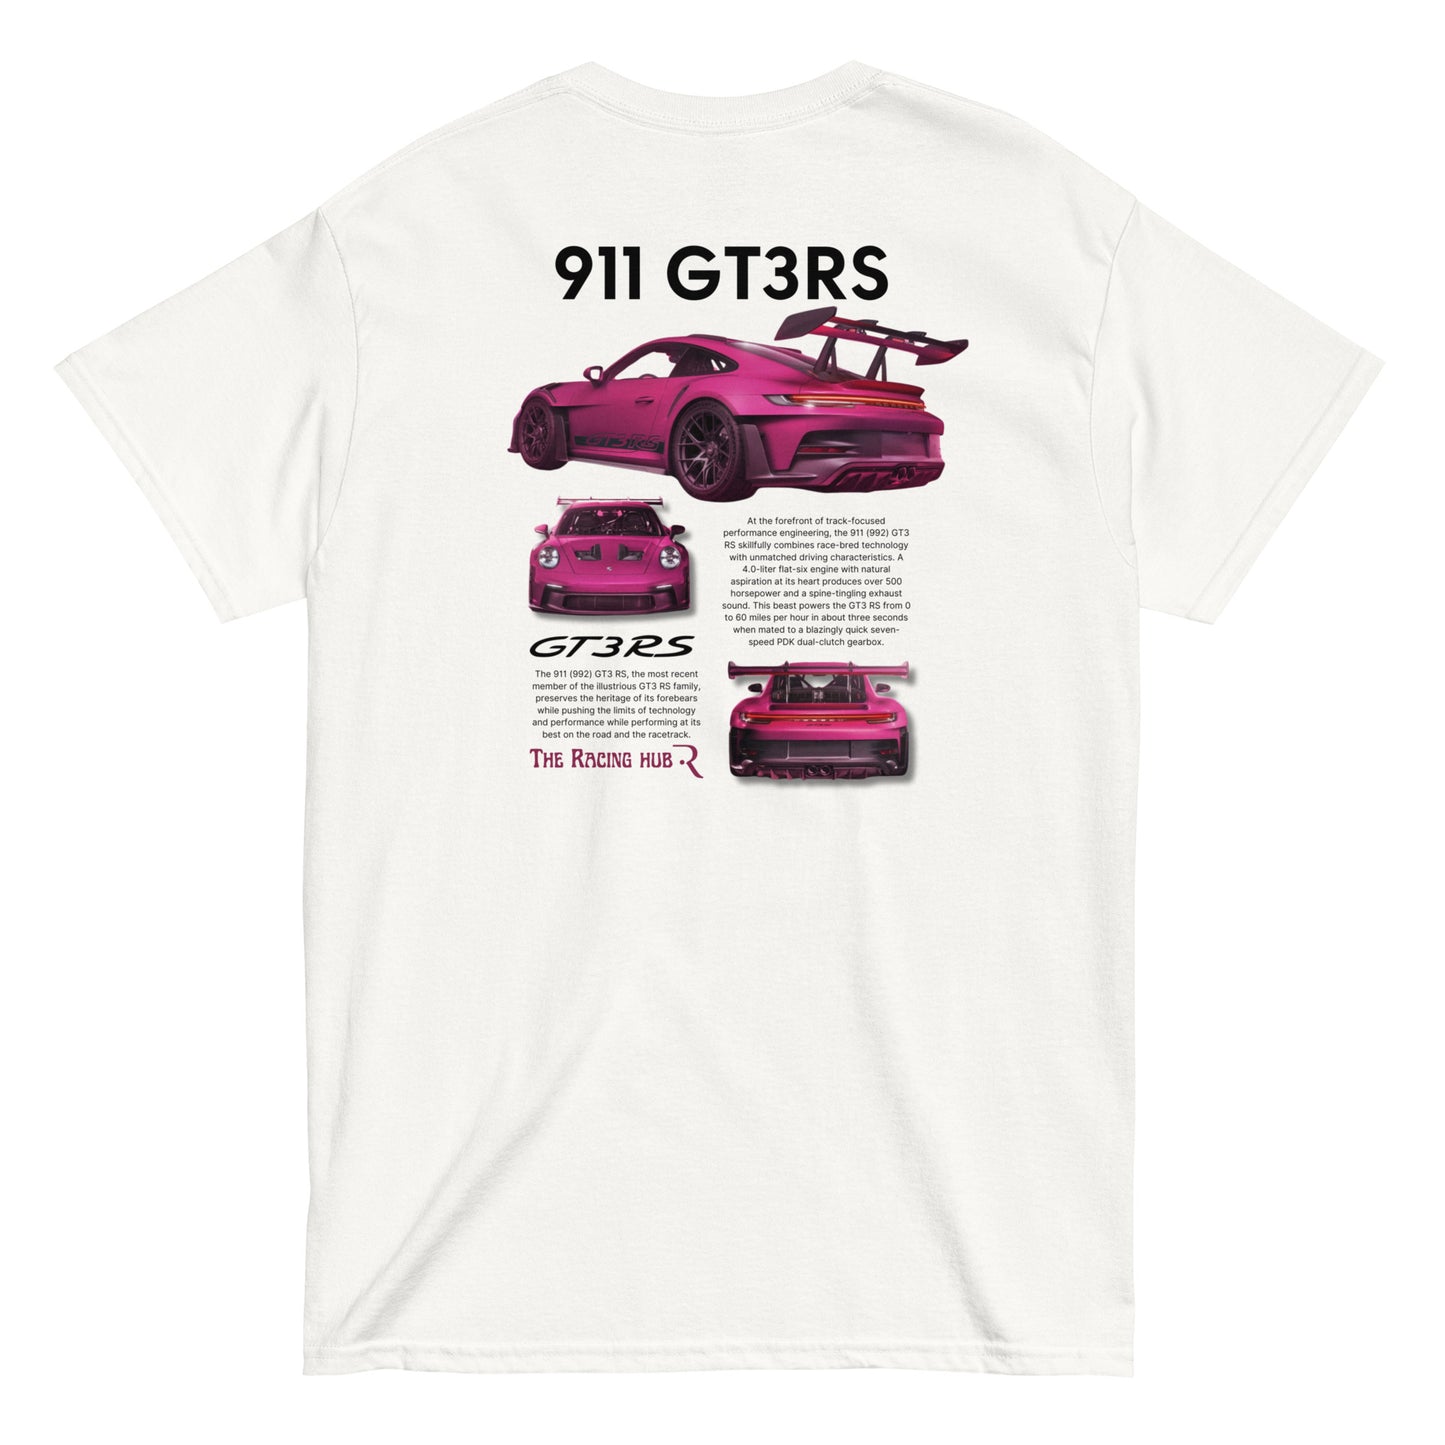 Pink GT3RS t-shirt